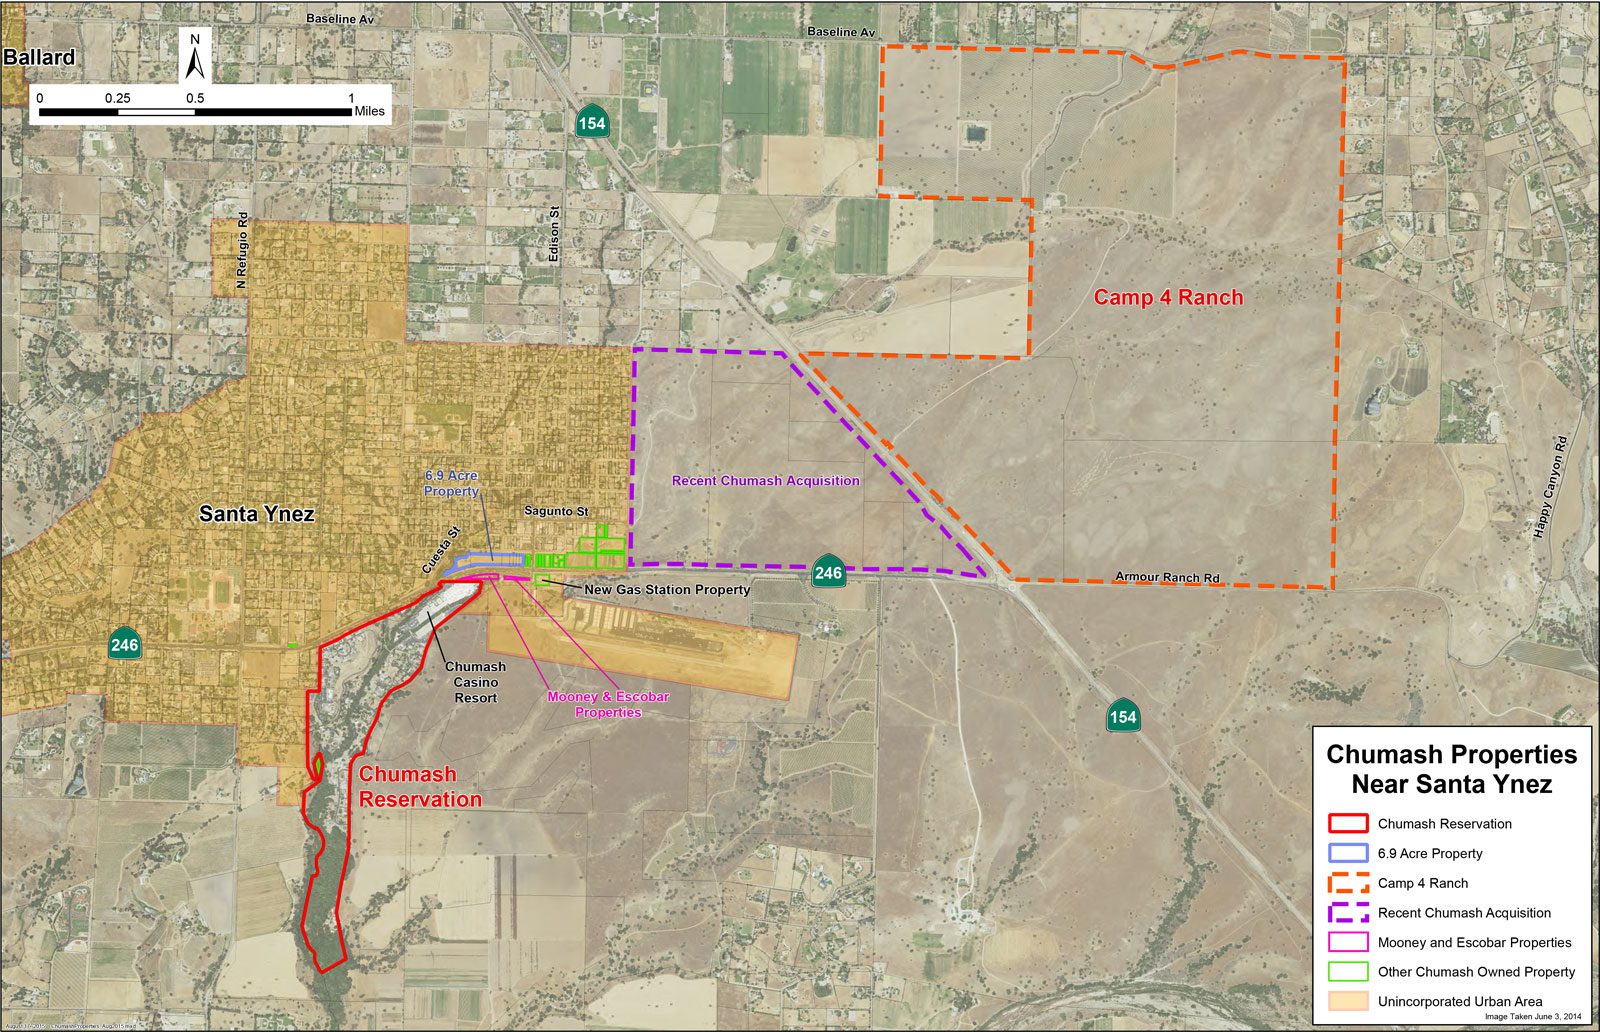 Camp 4 placed into federal trust – Chumash start plans to build homes